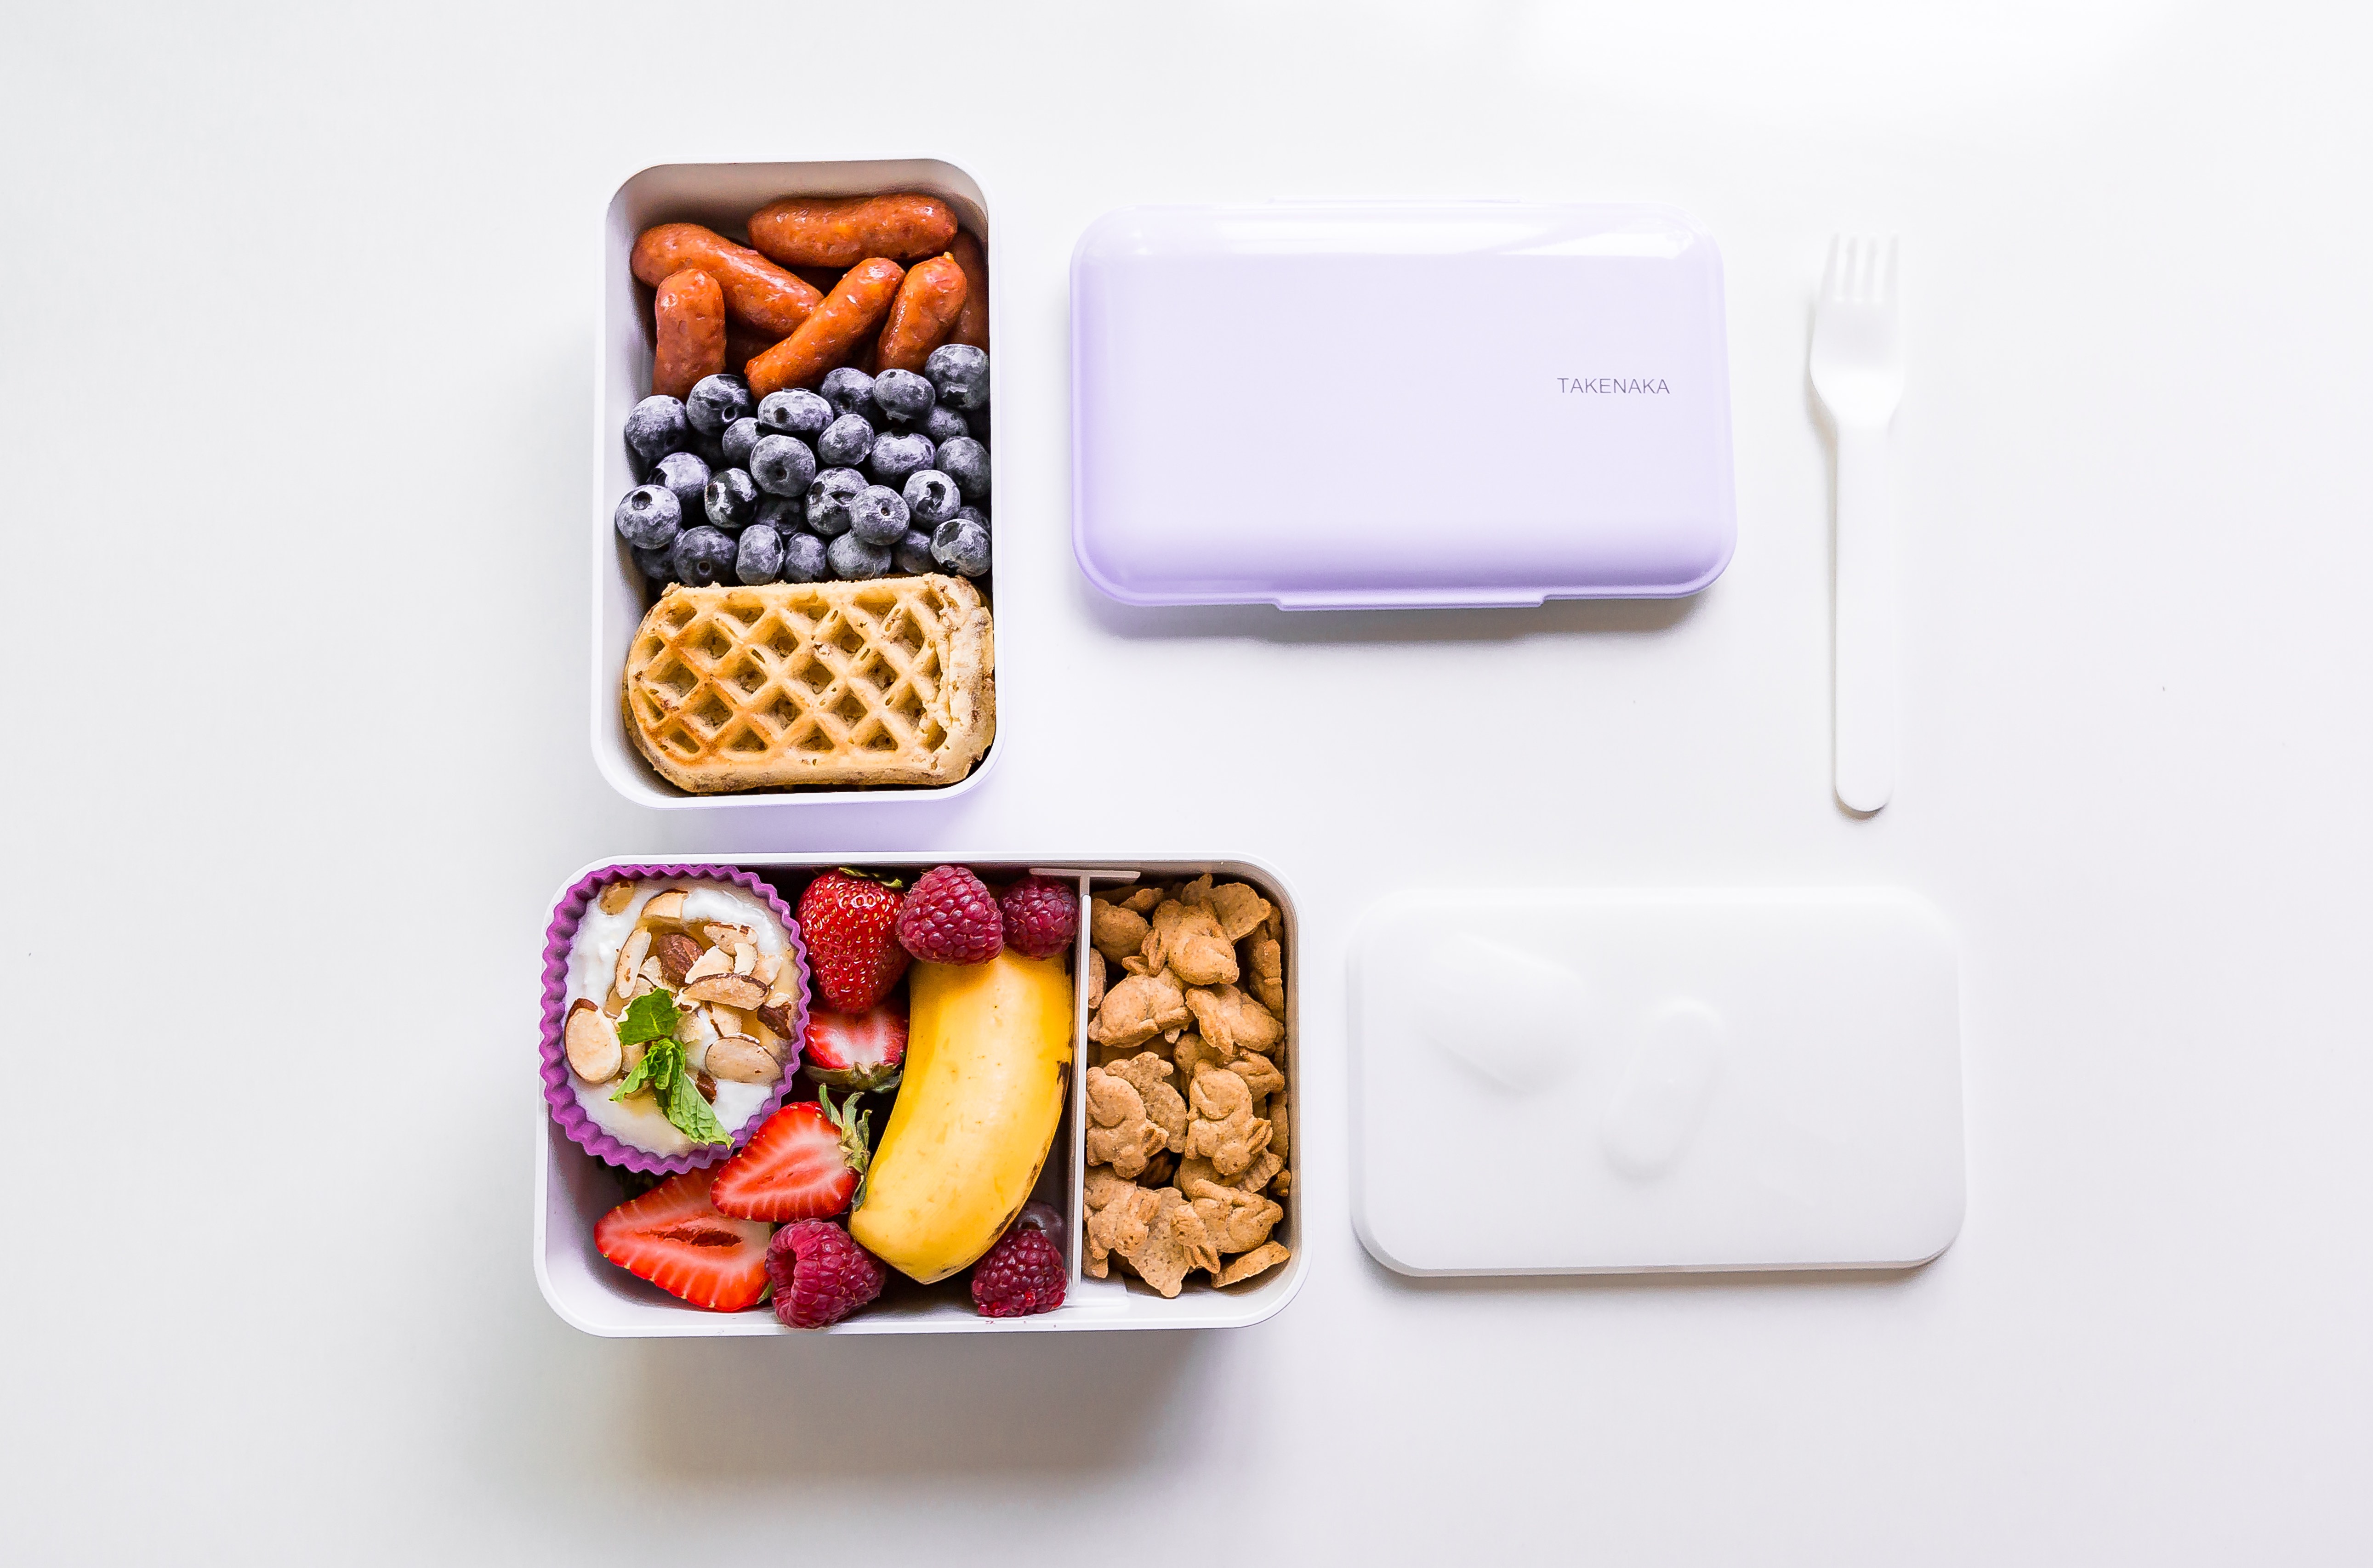 Back-to-school lunch ideas: Too-cute bento box meals – SheKnows